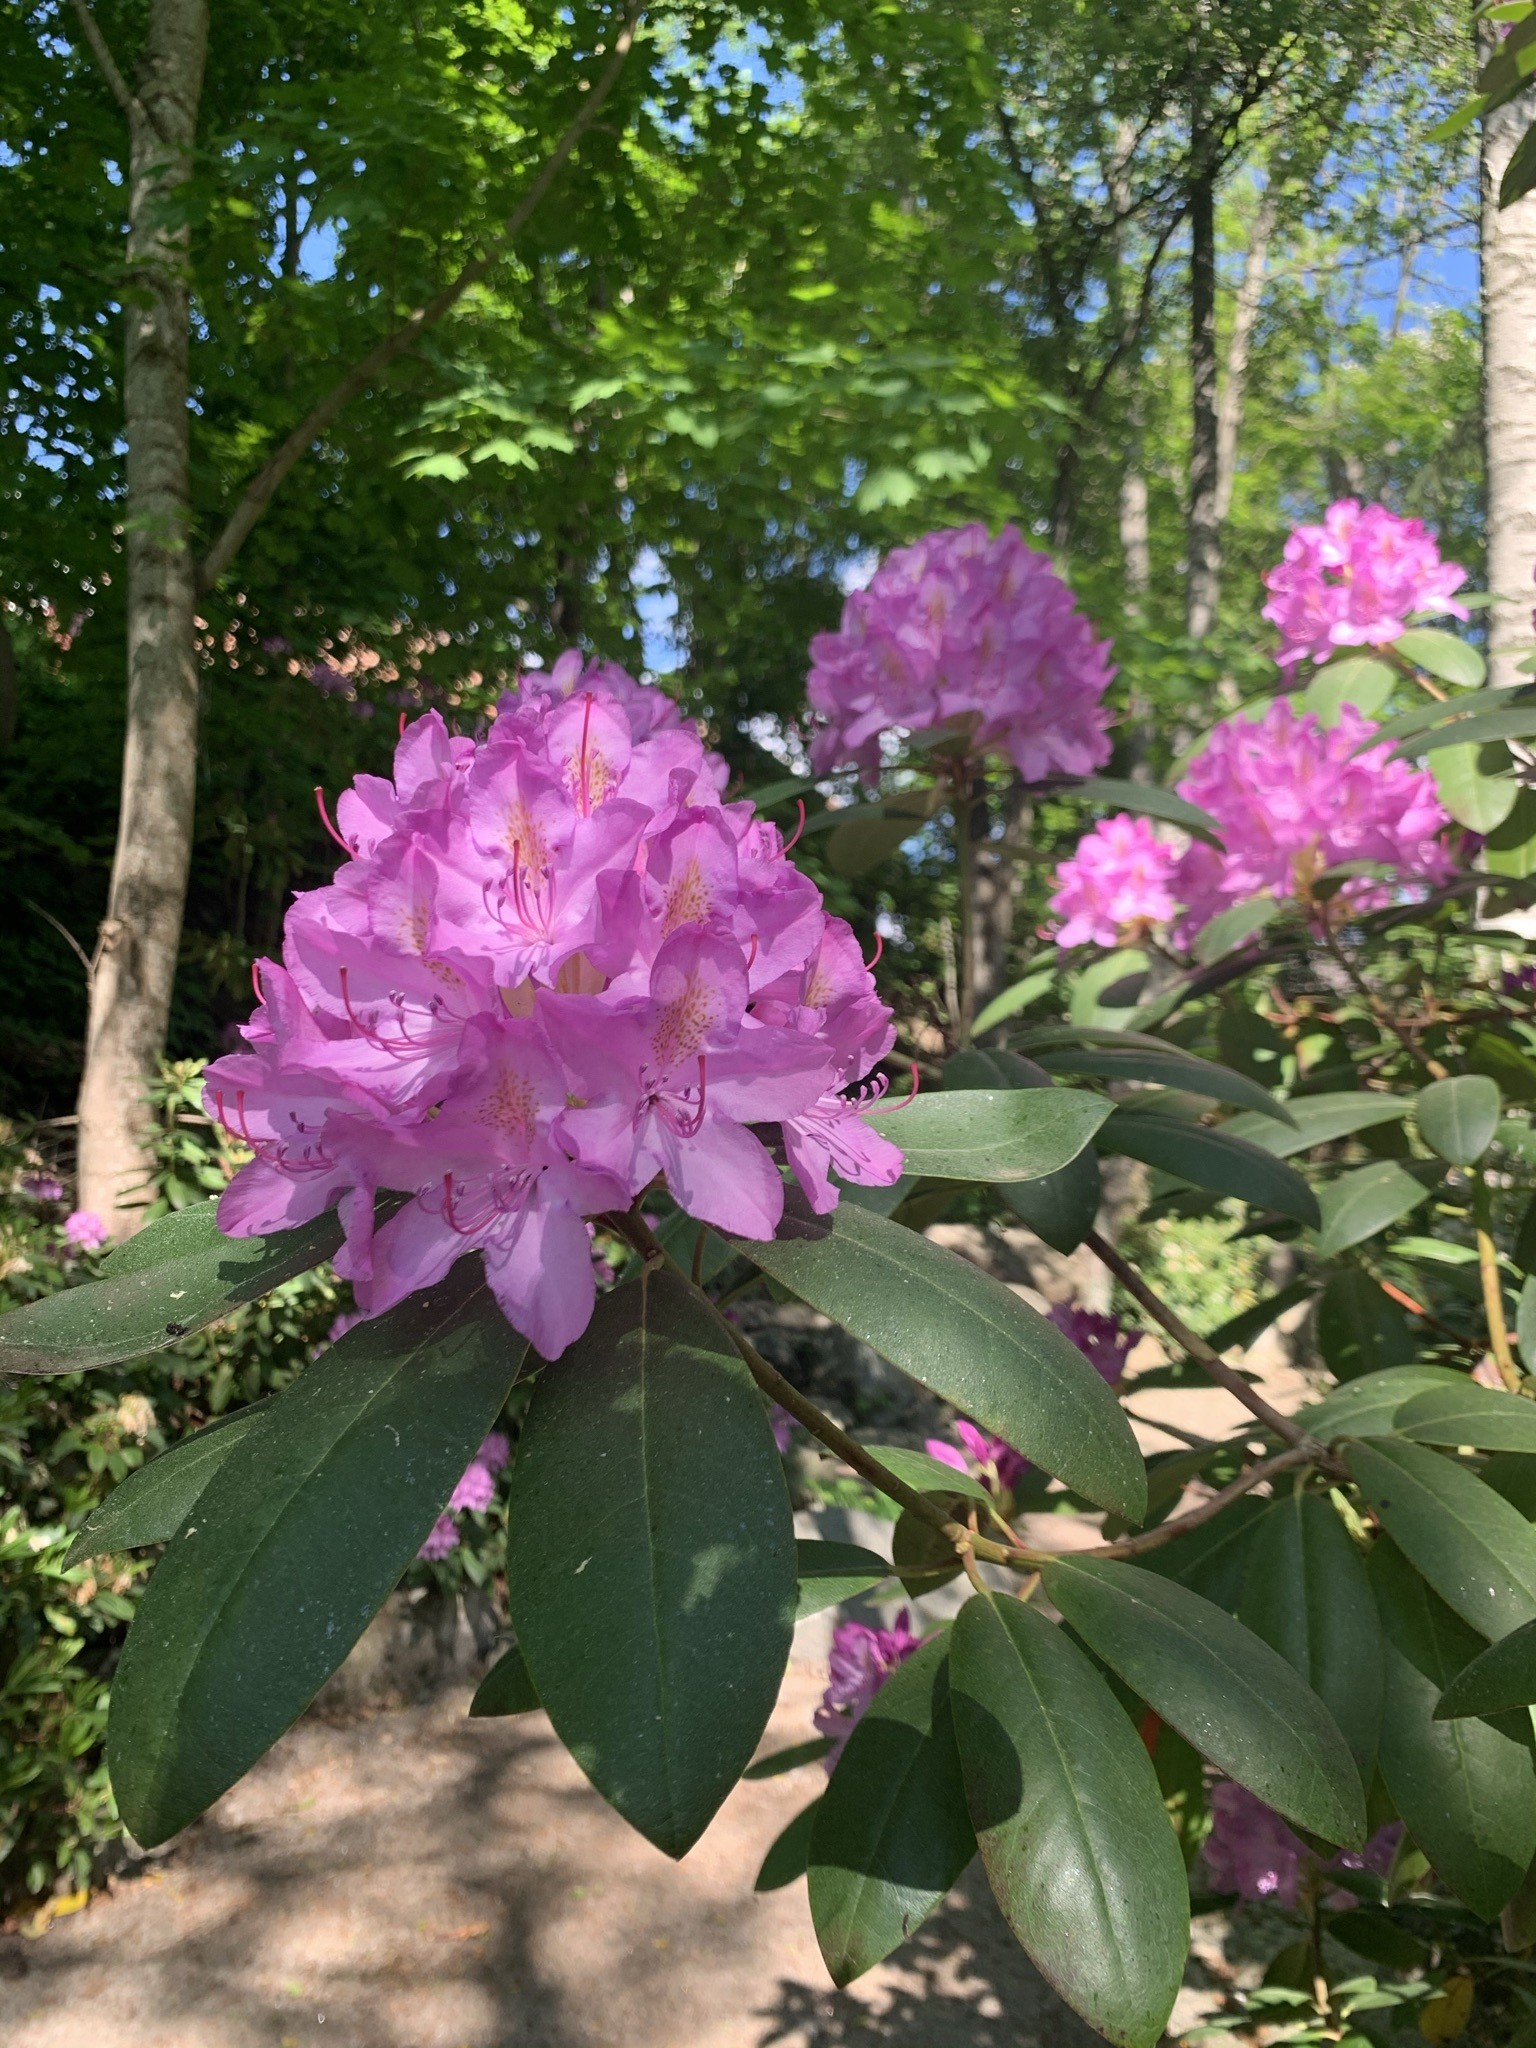 Lila rhododendronblommor.